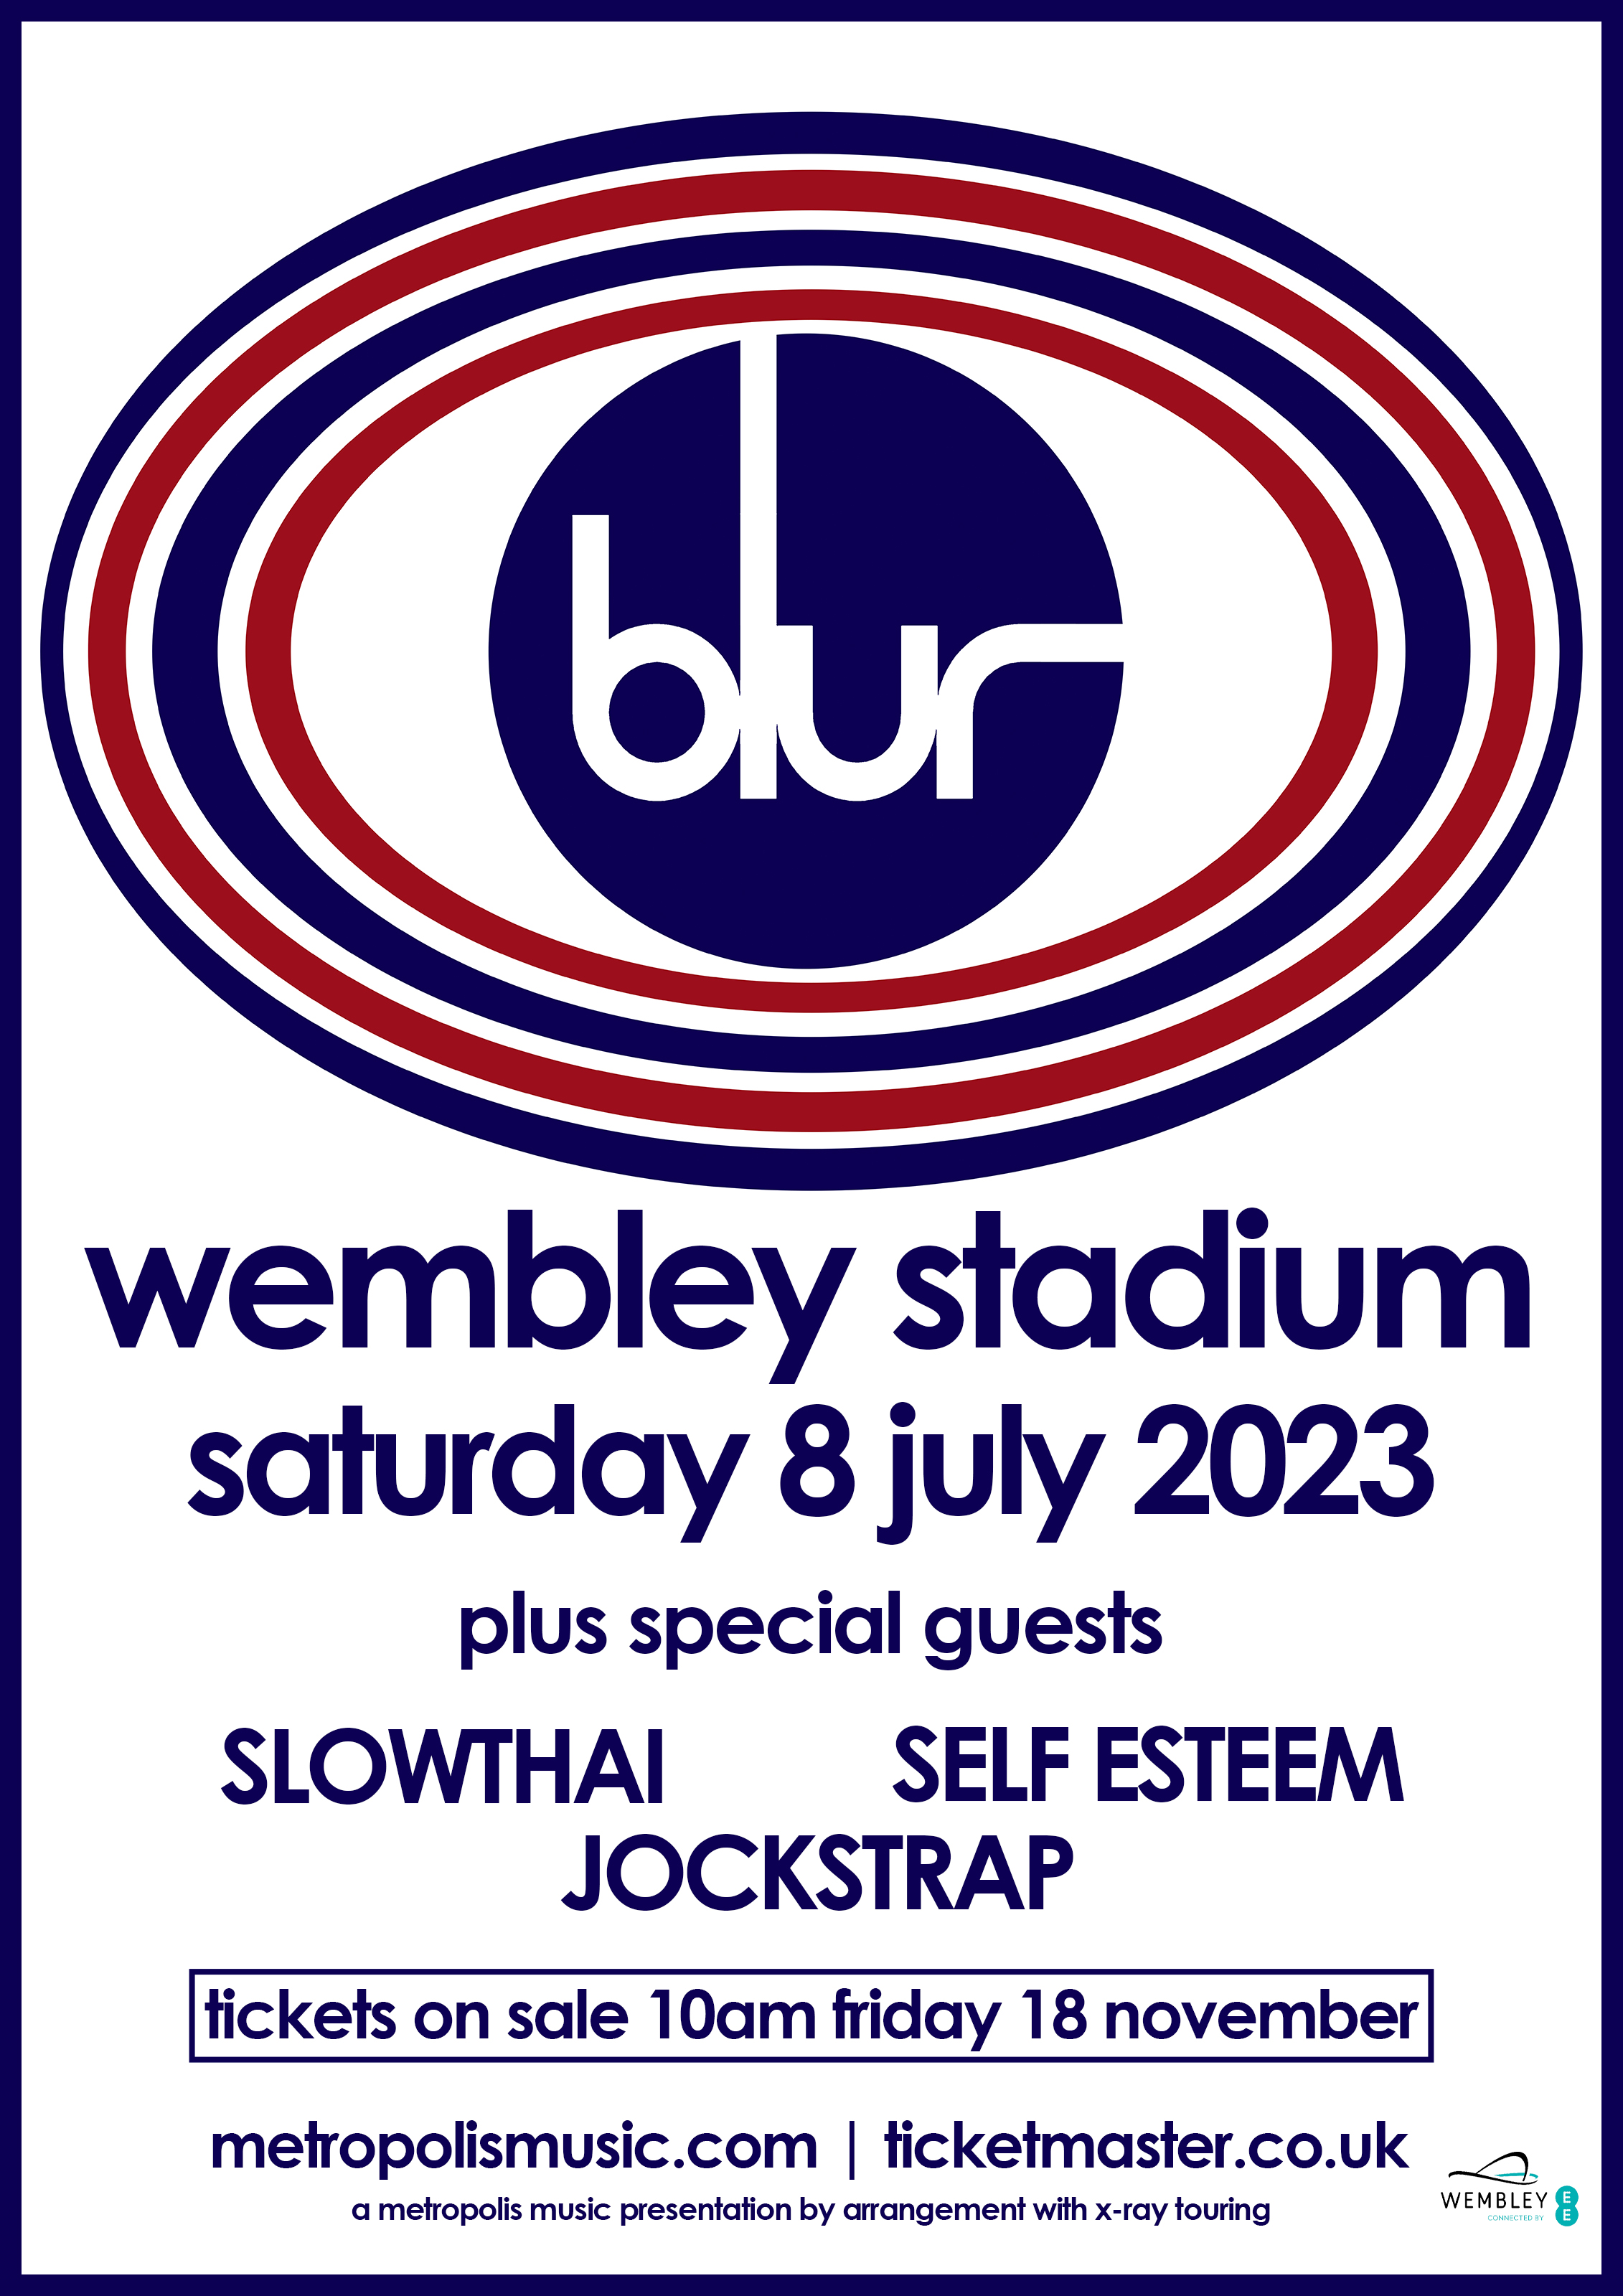 tickets on sale at 10am for Blur at London's Wembley Stadium eFestivals